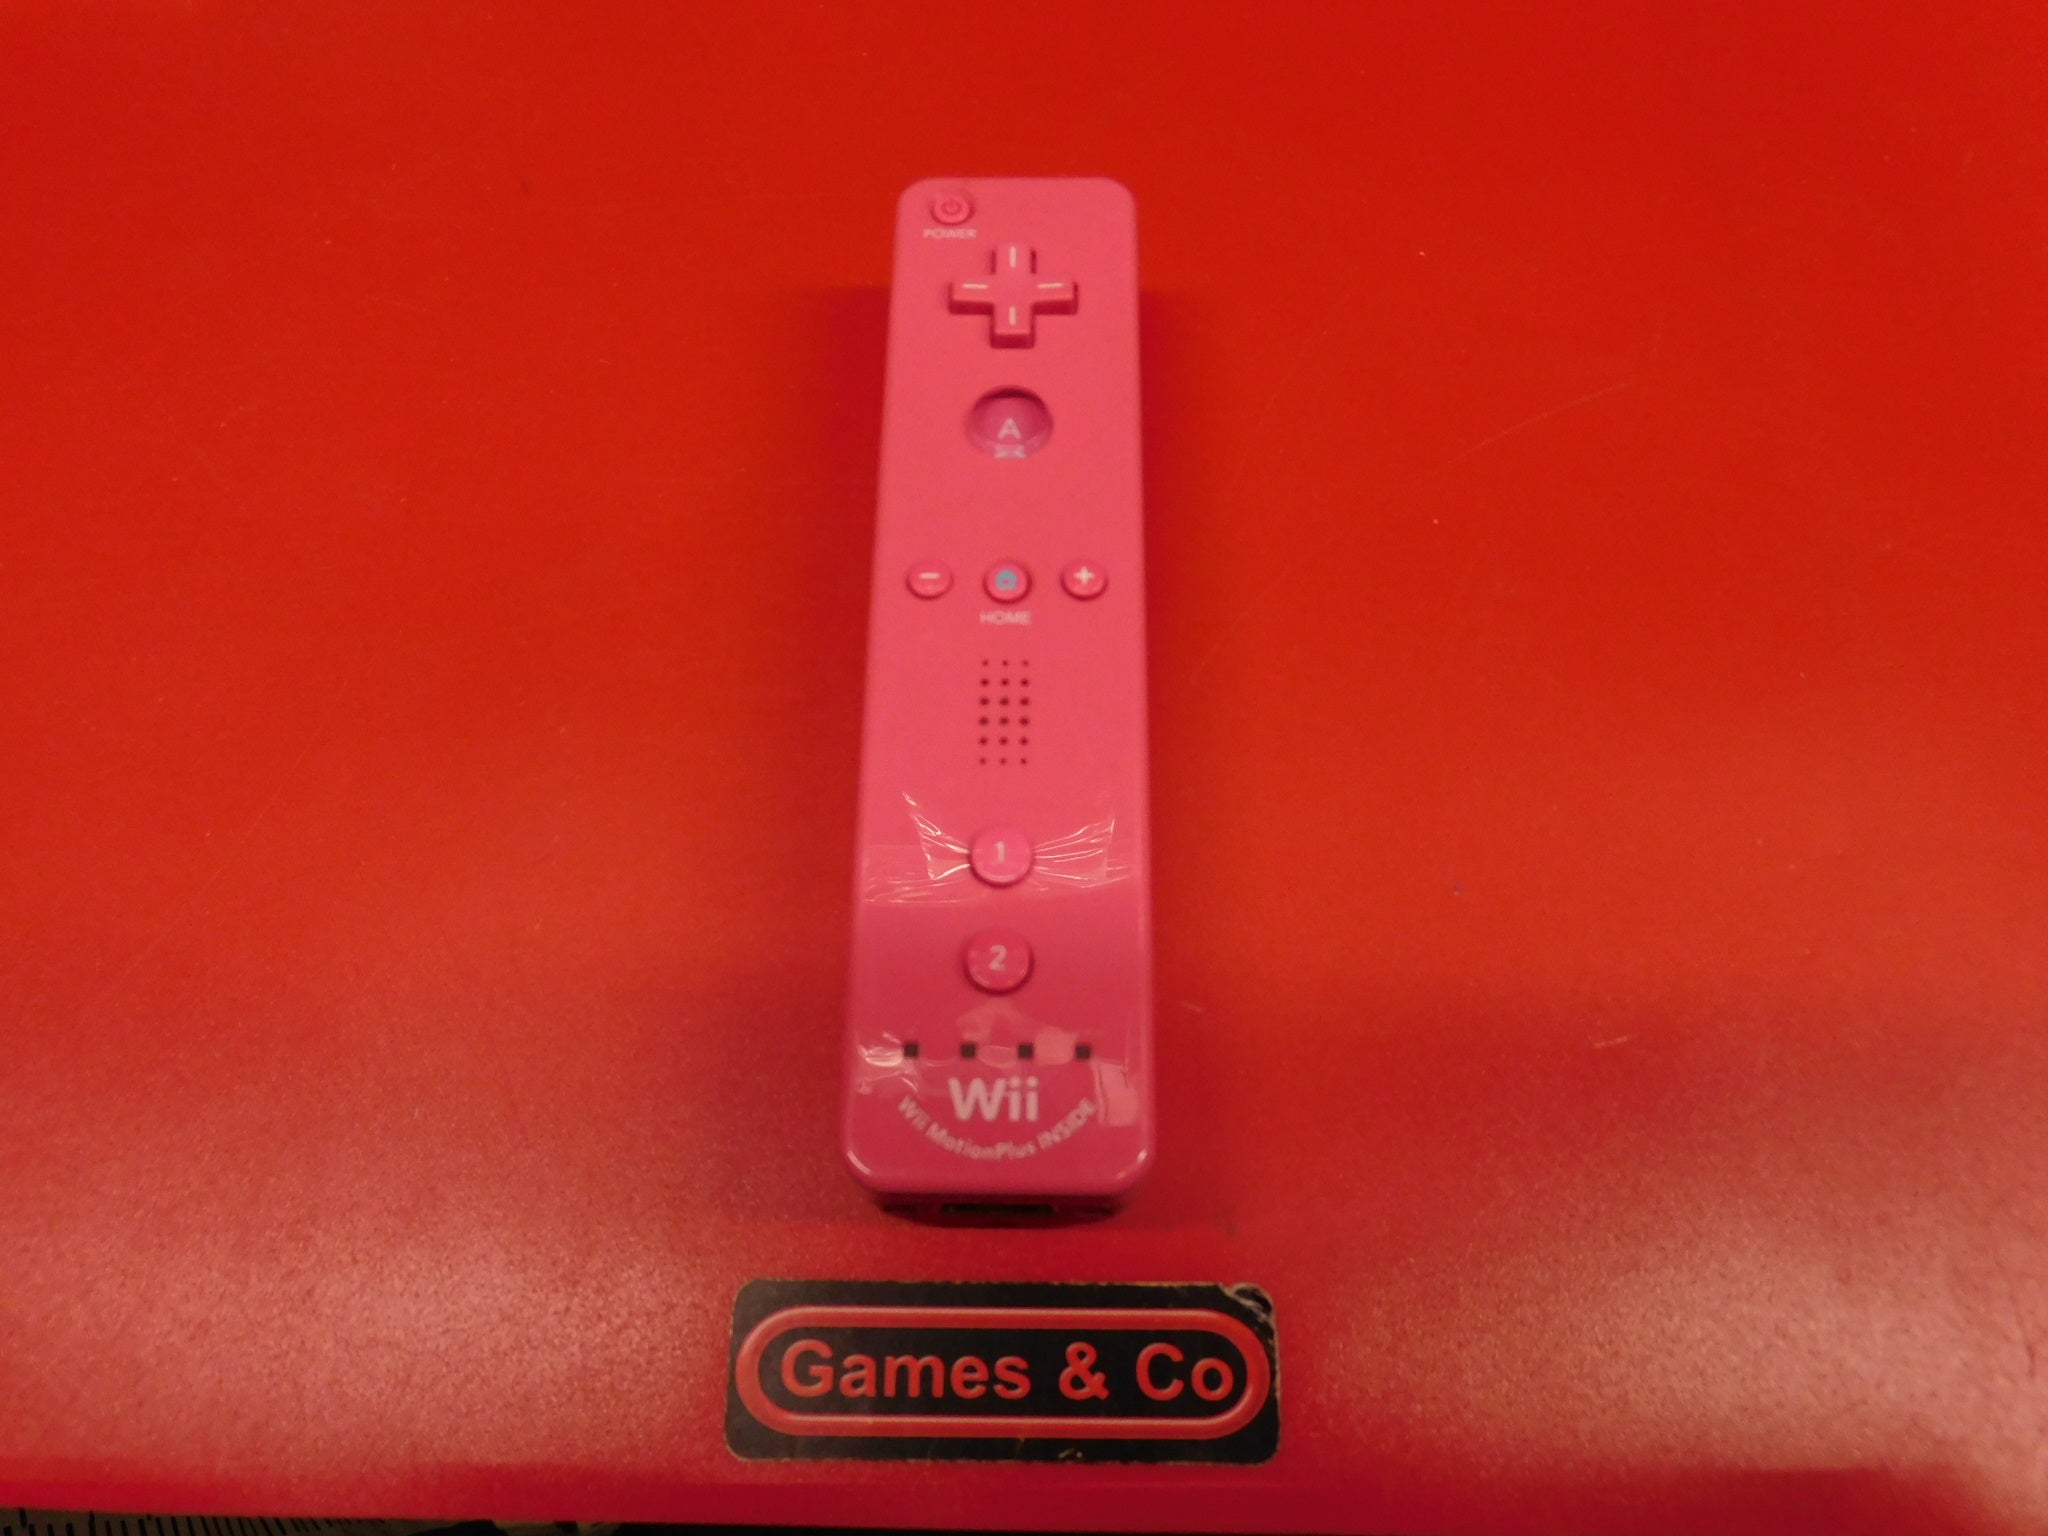 Wii remote Motion Plus inside